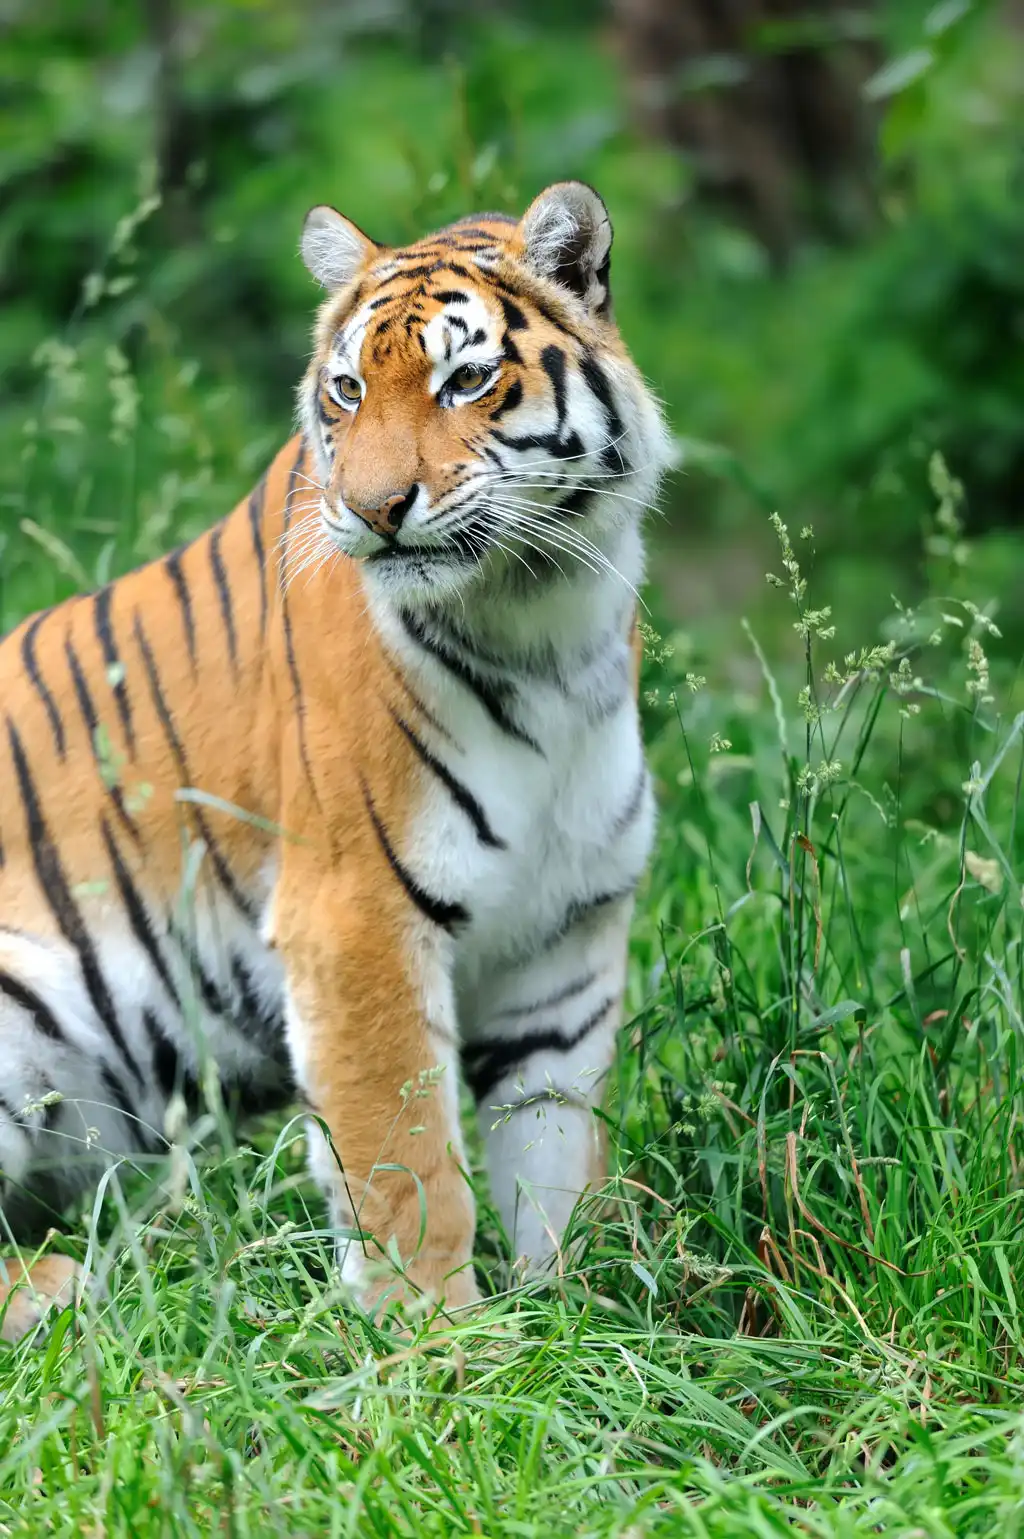 Tiger in a green grass